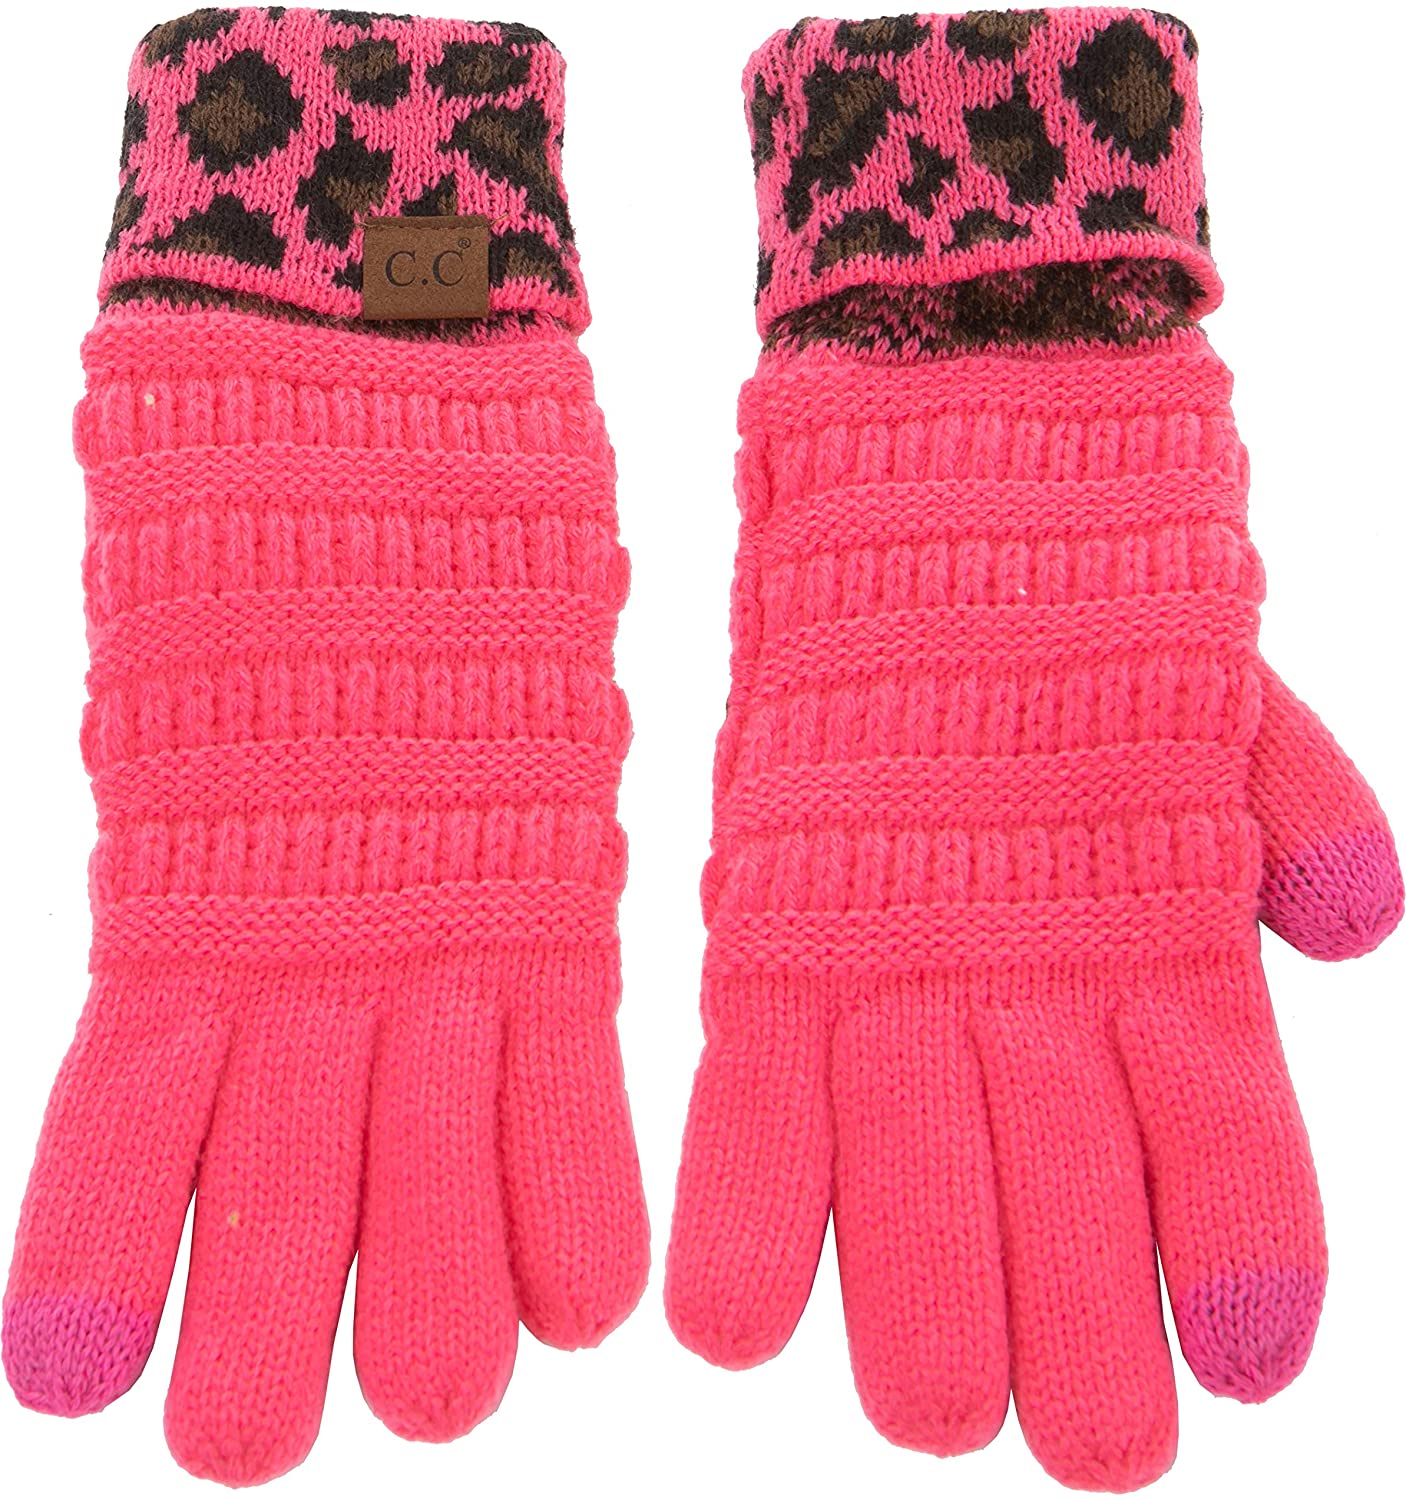 Funky Junque’s Beanies Matching Winter Lined Warm Knit Touchscreen Texting Gloves